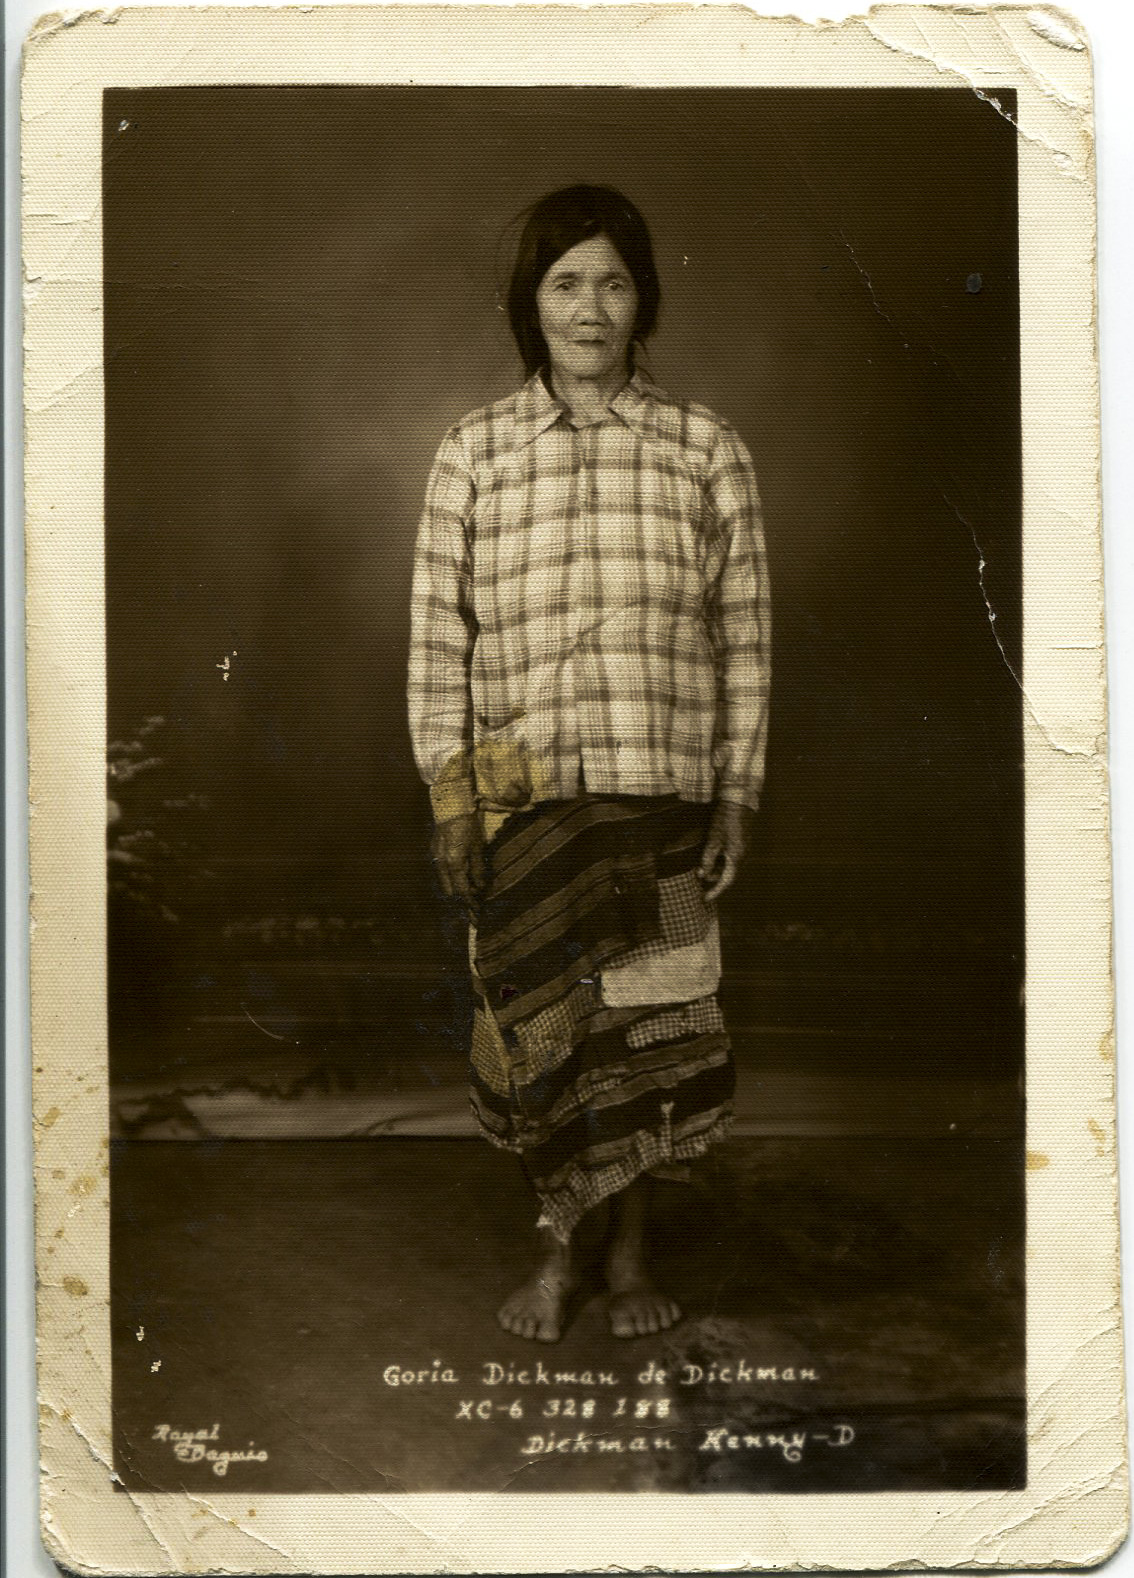 Gloria Dickman, Carol Lamen's great-grandmother, taken in Baguio, Philippines. Any views, findings, conclusions, or recommendations expressed in this story do not necessarily represent those of the National Endowment for the Humanities. (c) Field Museum of Natural History - CC BY-NC 4.0